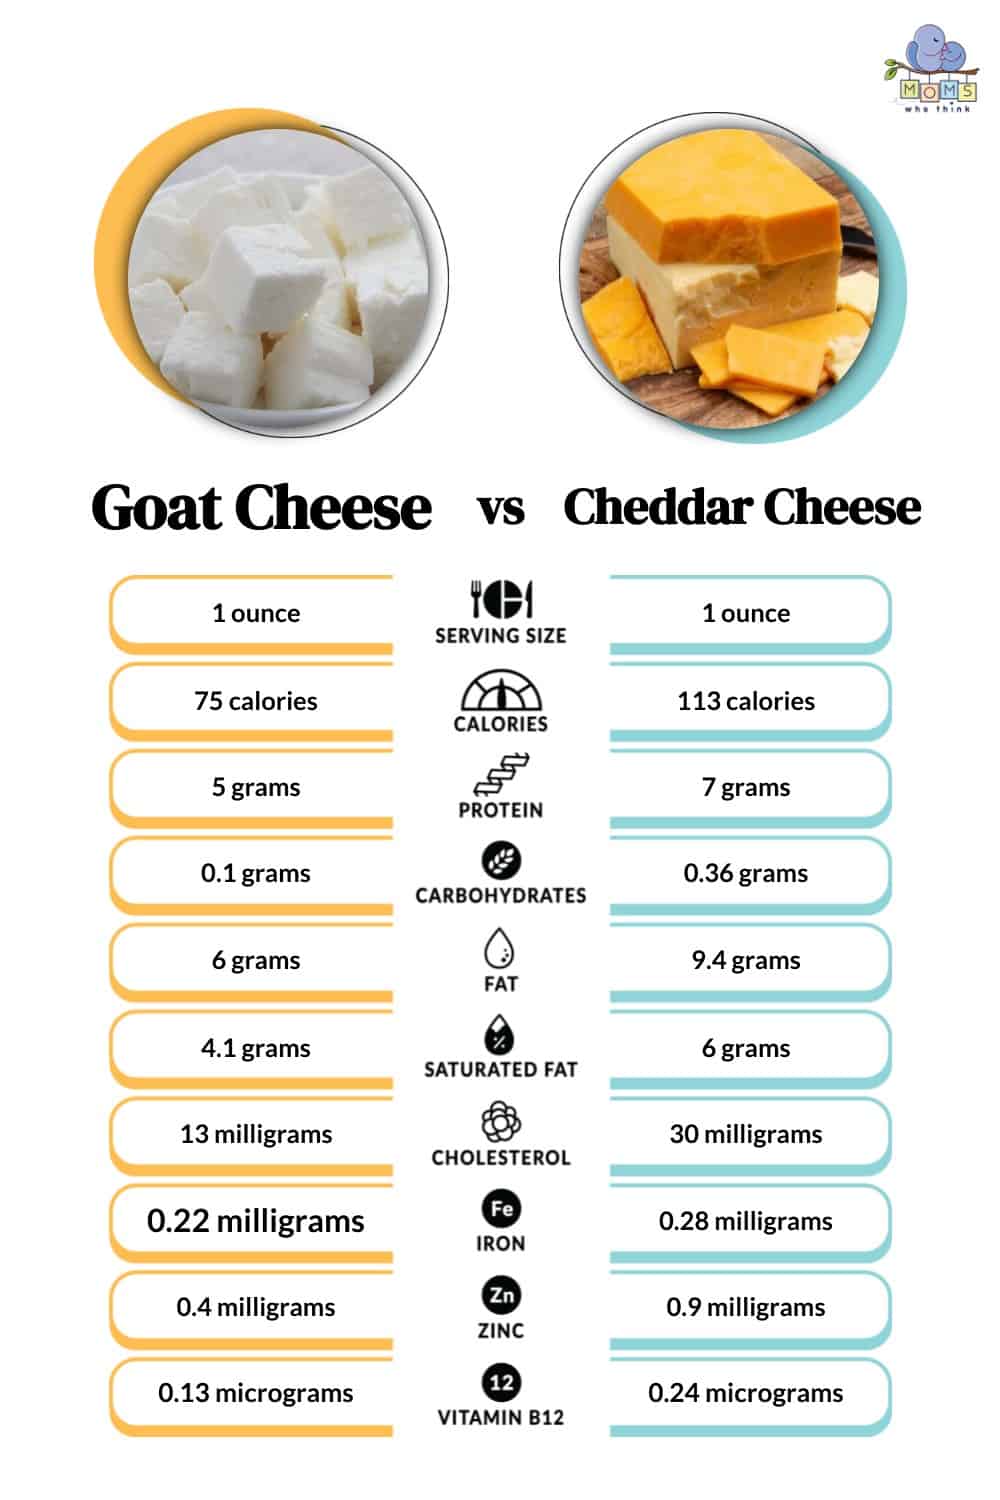 Goat Cheese vs Cheddar Cheese Nutrition